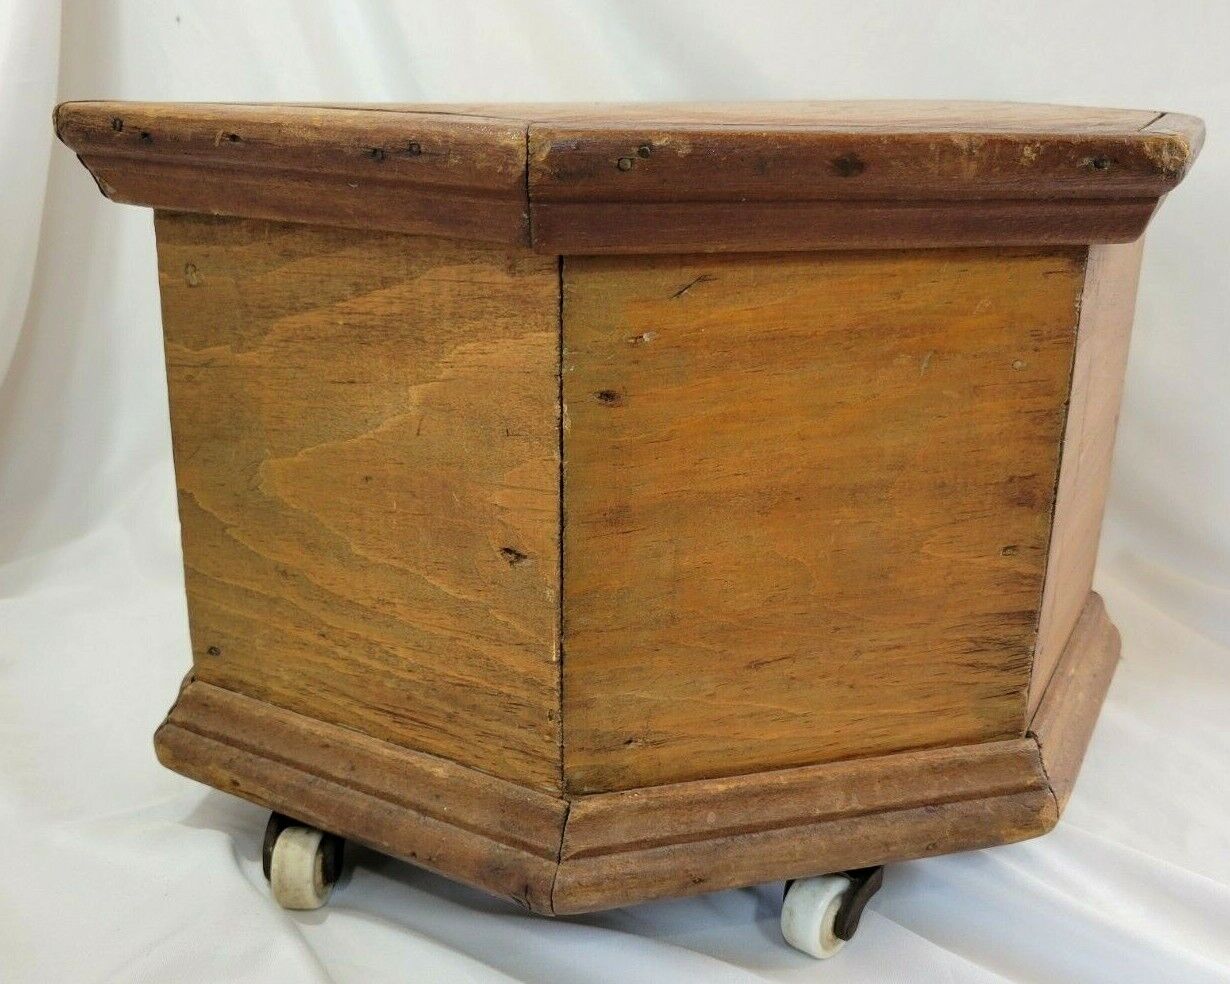 Primitive Antique 7 Sided Wooden Box with Castor wheels 